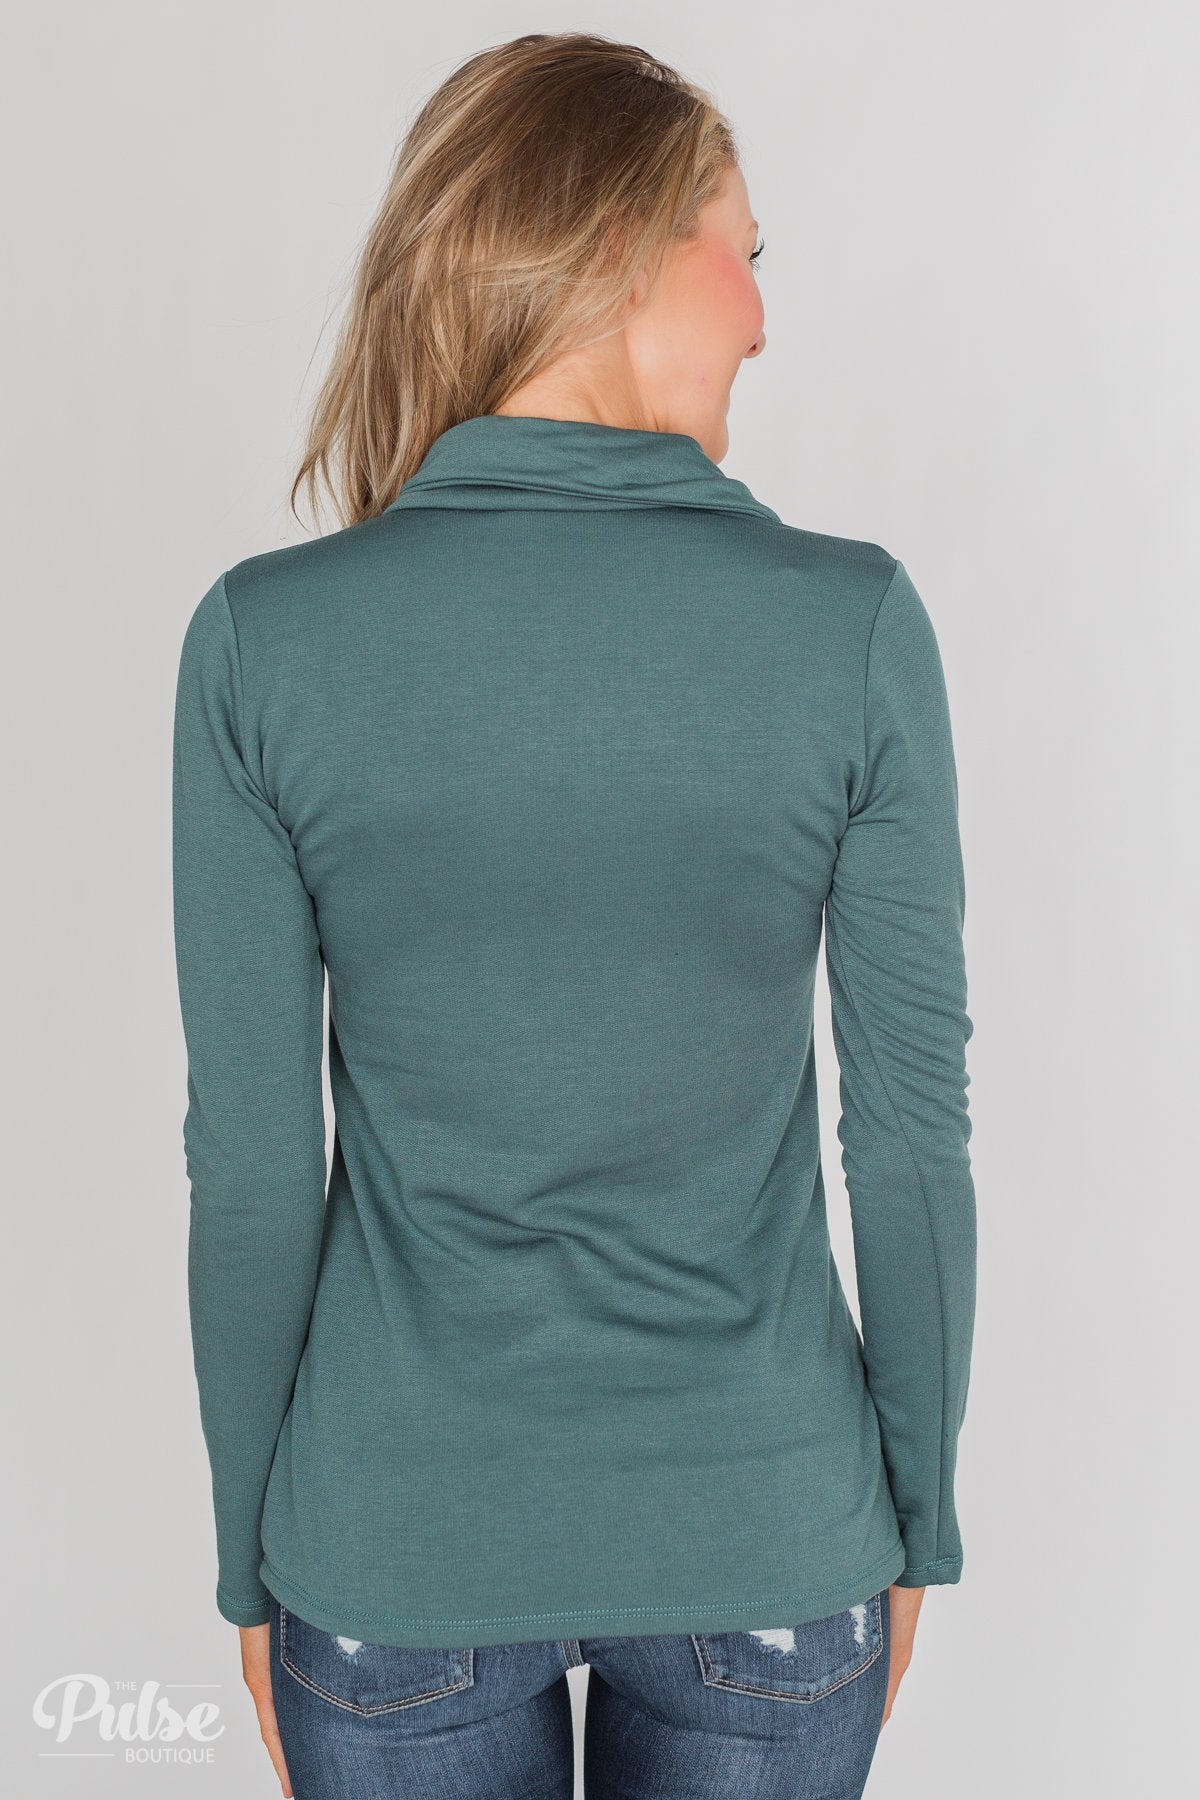 Give Me Time Zipper Pullover Top - Dark Teal